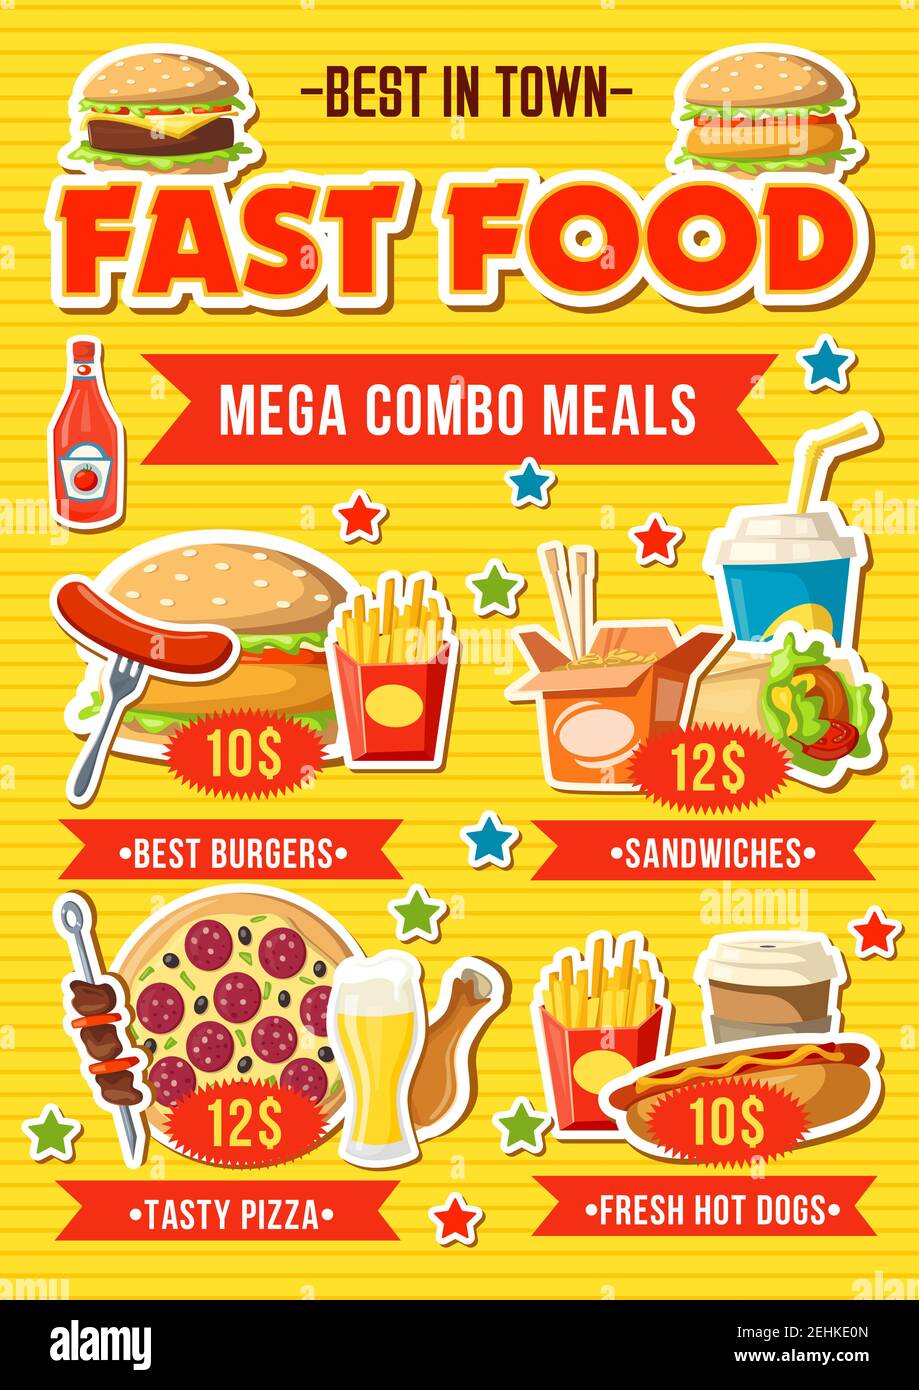 Fast food menu with combo meal. Hamburger and fries, pizza